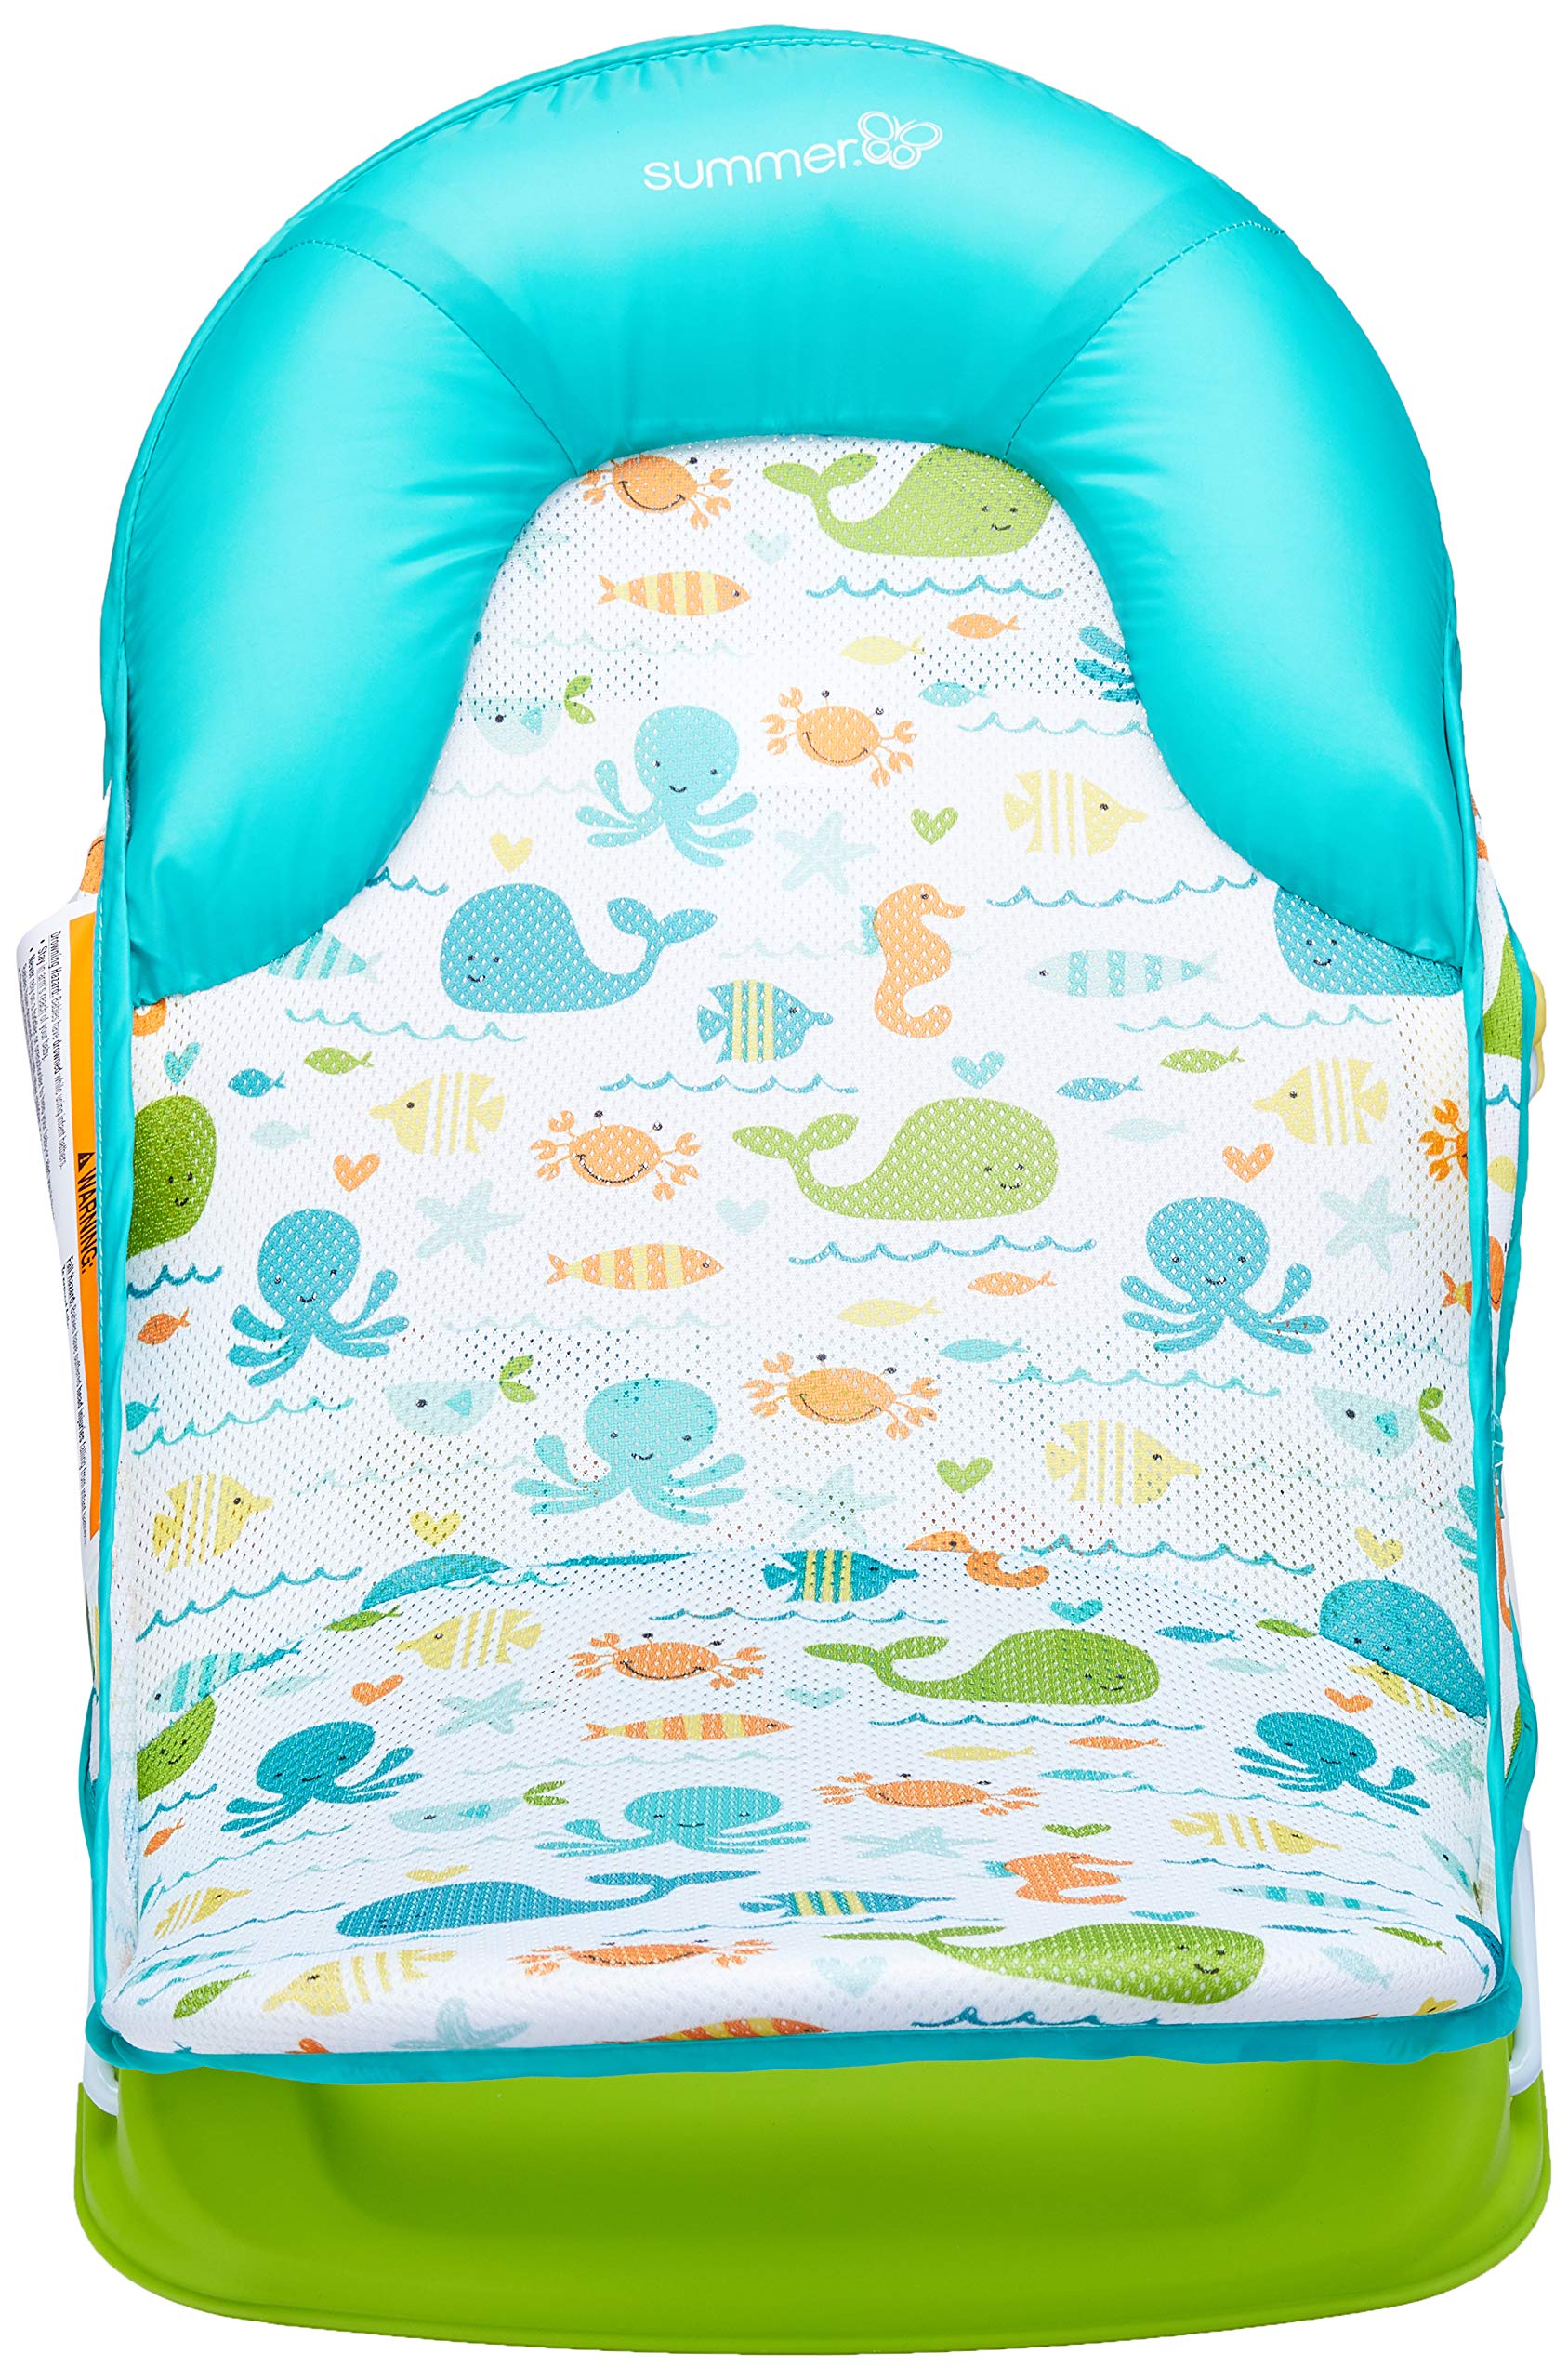 Summer Infant Deluxe Baby Bather, Multi